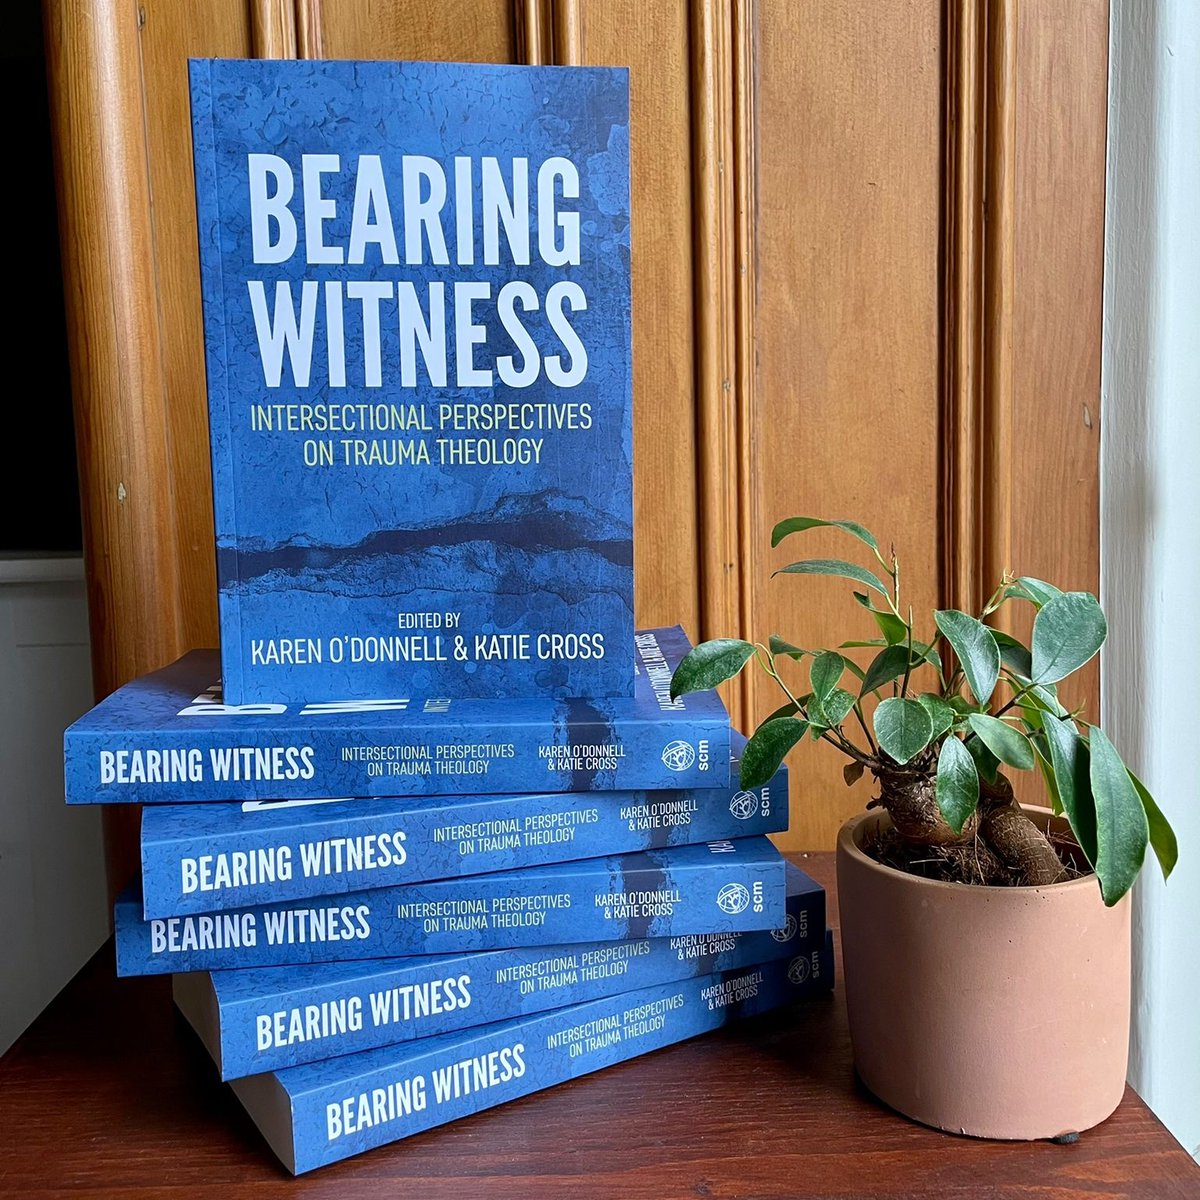 #BearingWitness TOMORROW (5th Sept) keep an eye out for:
📚 a book giveaway
✏️  sneak peeks and tweets from our authors about their chapters 

Follow + tweet us with the hashtag #BearingWitness! @scmpress @kmrodonnell 

(photo creds @pierrelepop, ficus from Aldi, model’s own)